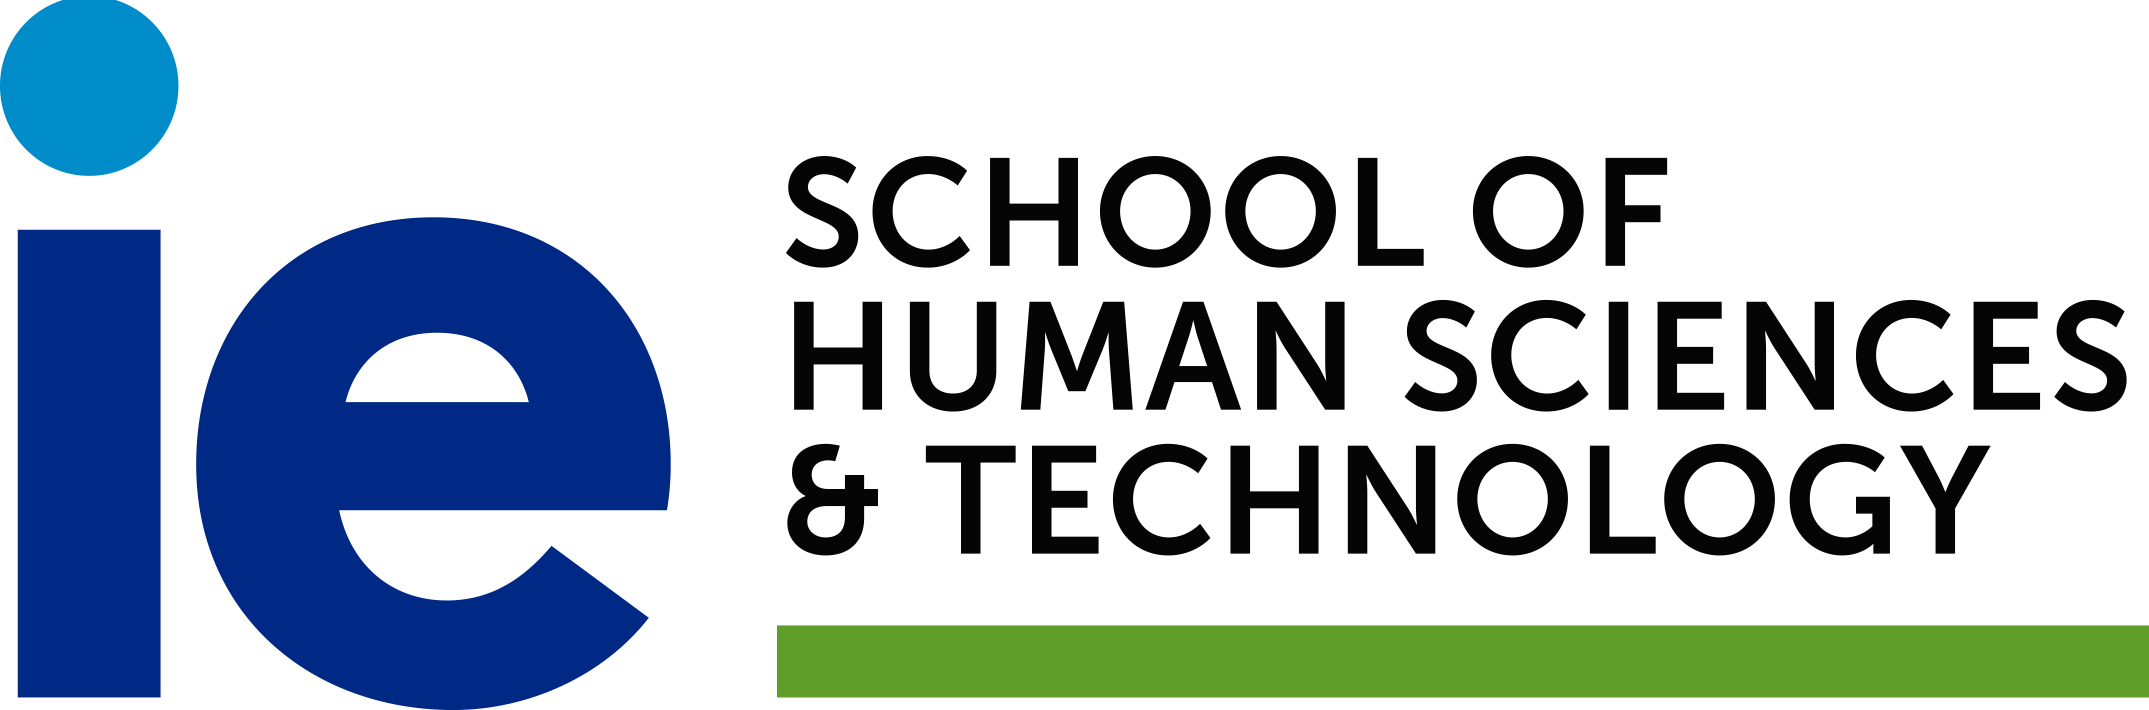 School of human sciences and technology